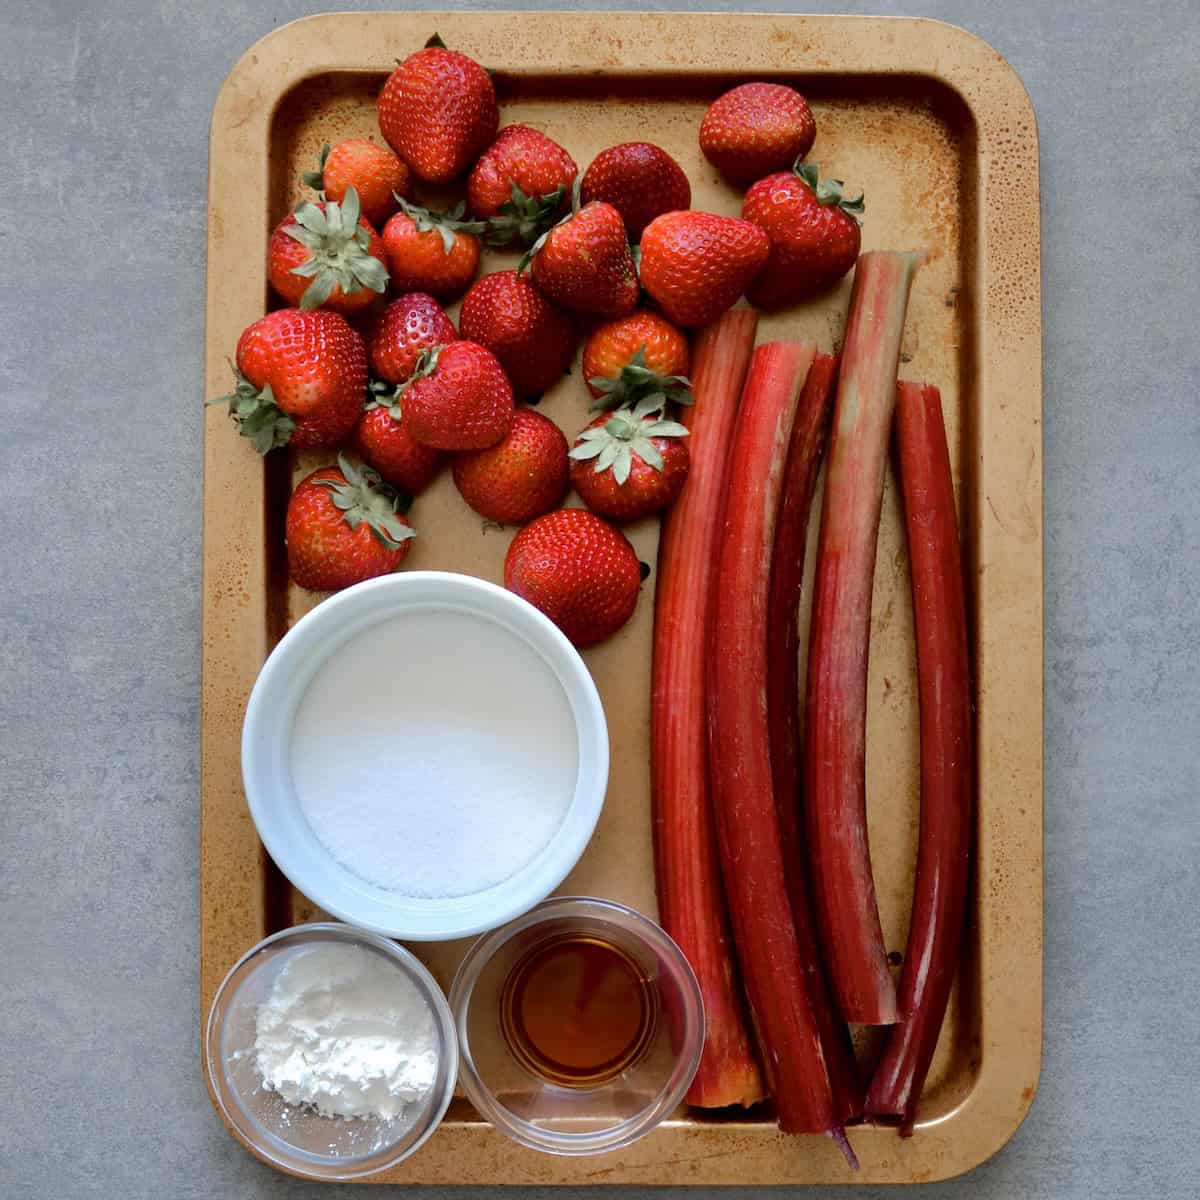 Ingredients for strawberry rhubarb filling